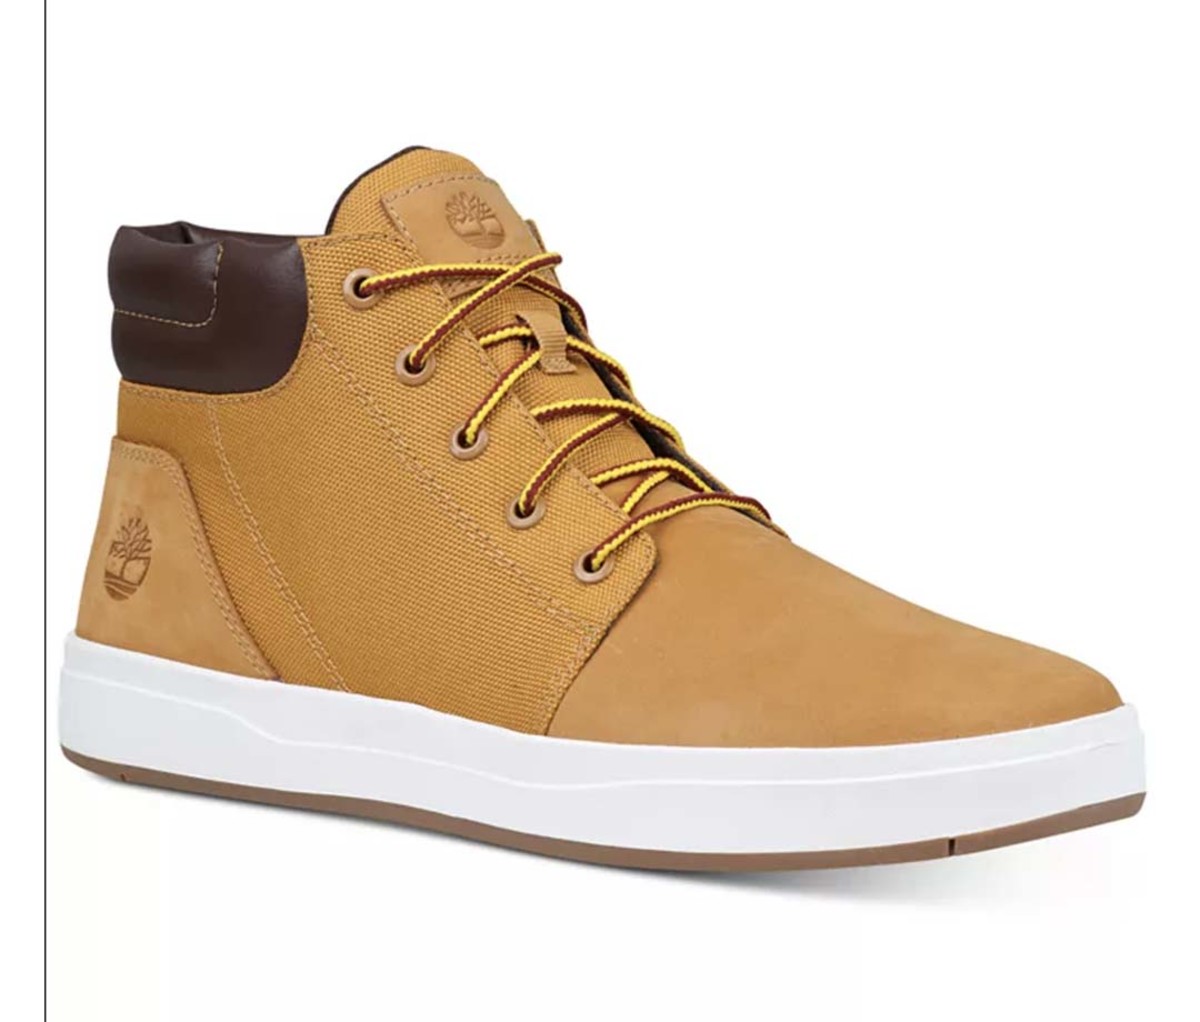 Fobia Riego borgoña Timberland Chukka Boots Are Yours at Black Friday Prices Today!